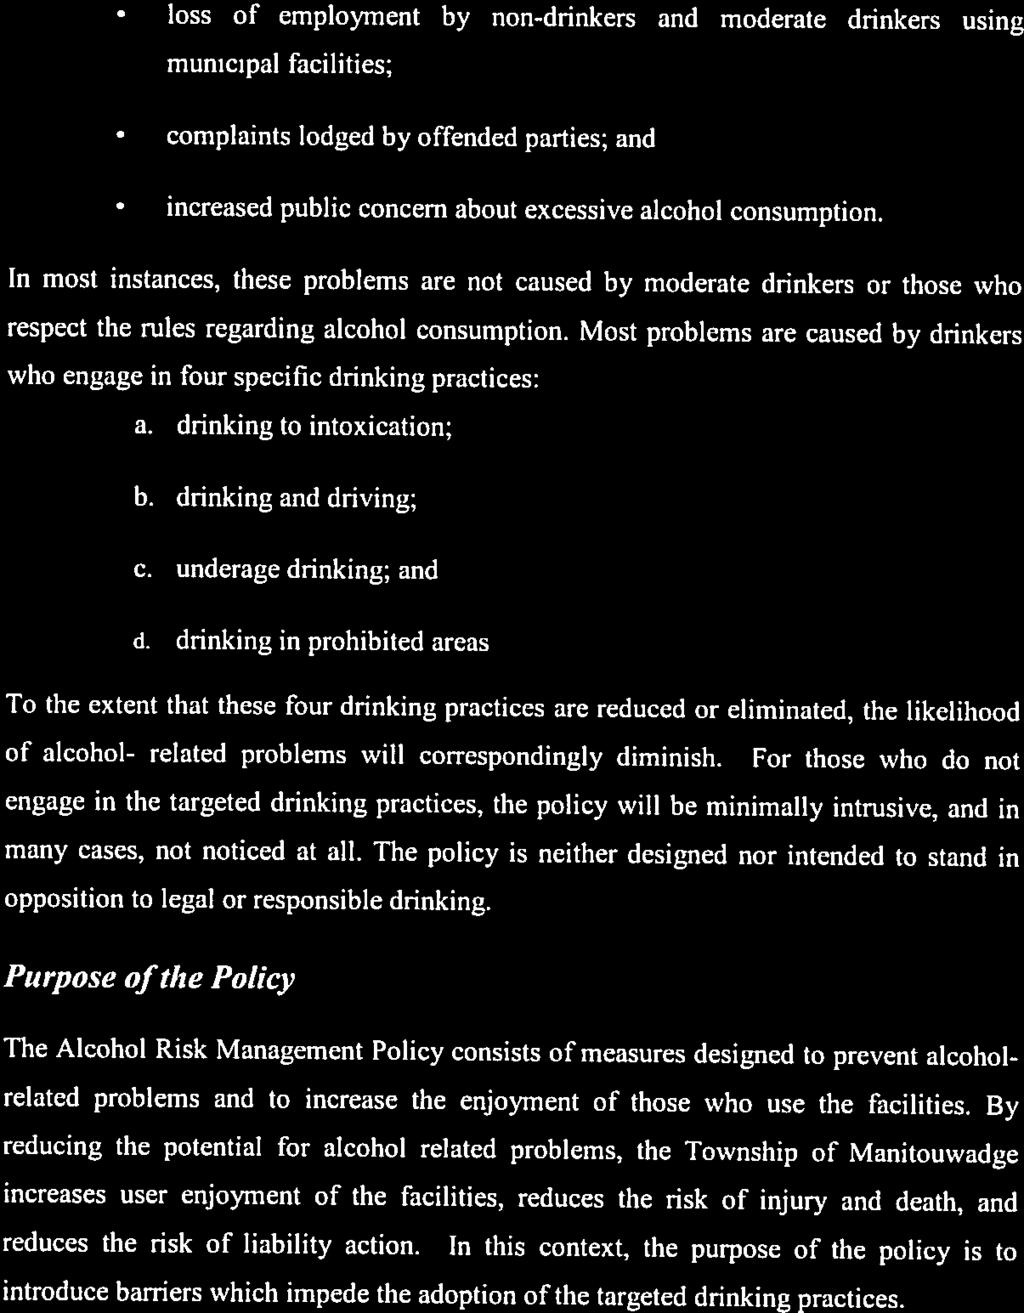 loss of employment by non-drinkers and moderate drinkers using municipal facilities; complaints lodged by offended parties; and increased public concern about excessive alcohol consumption.